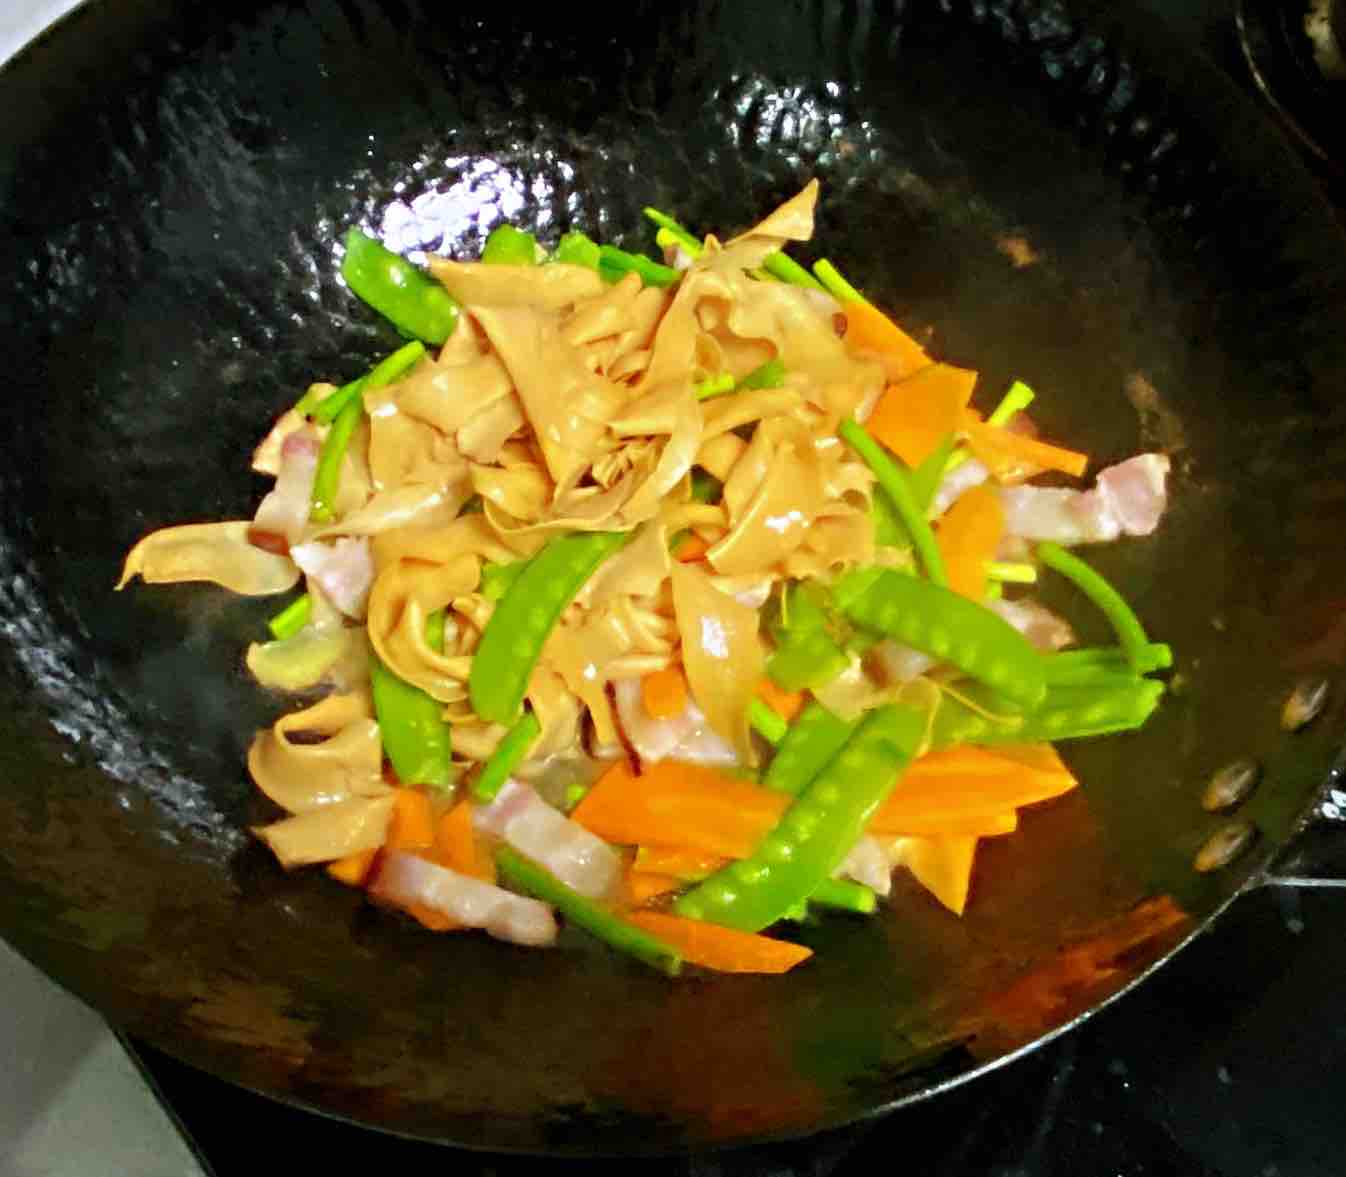 [recipe for Pregnant Women] Stir-fried Snow Peas with Bacon and Eryngii Mushrooms, The Taste is Strong recipe